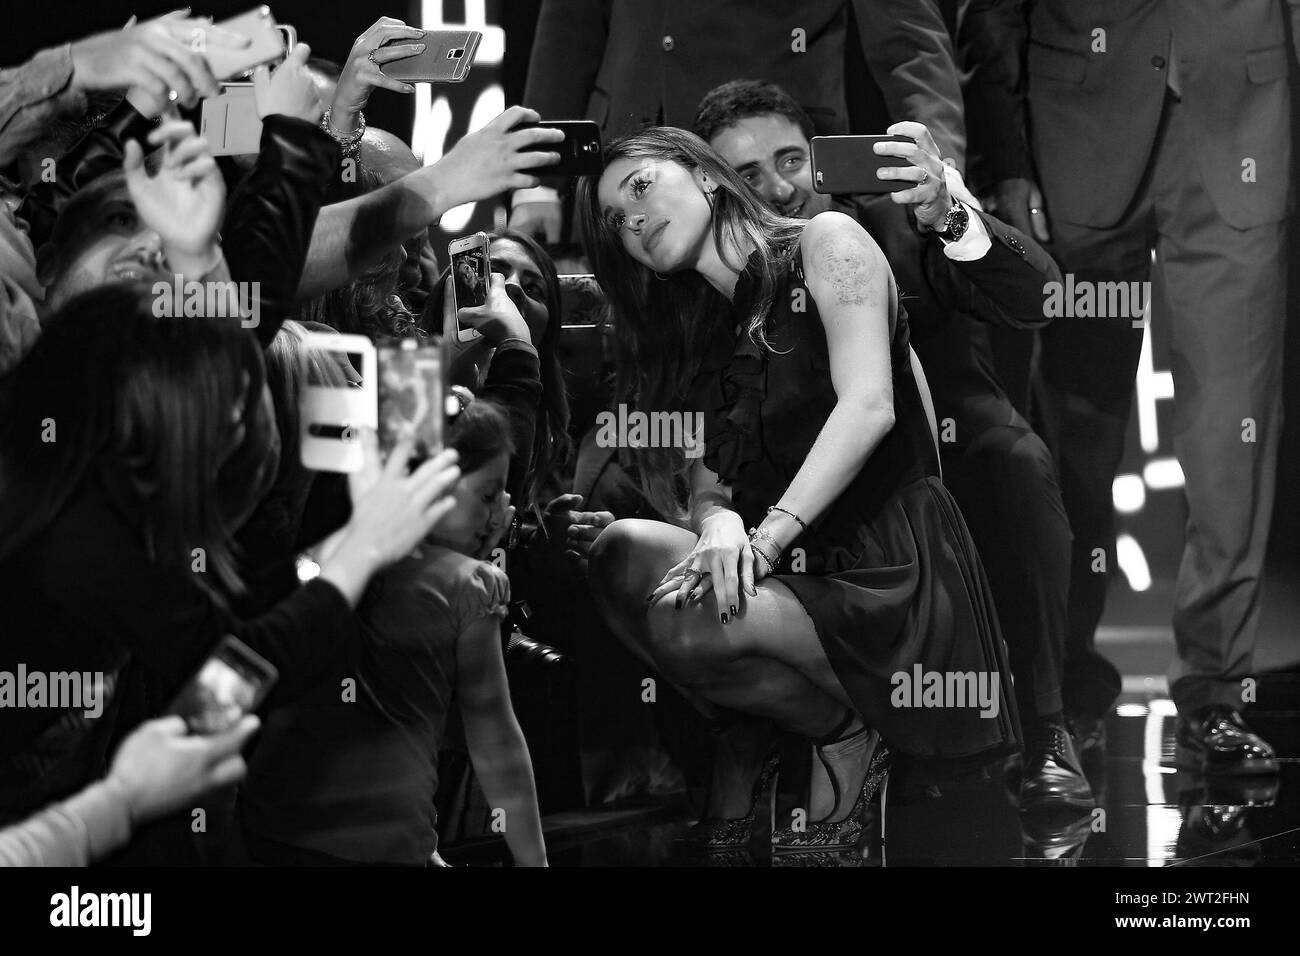 (EDITORS NOTE: Image has been converted to black and white.) The showgirl Belen Rodriguez taking a selfie with her fans after a show in Naples Stock Photo